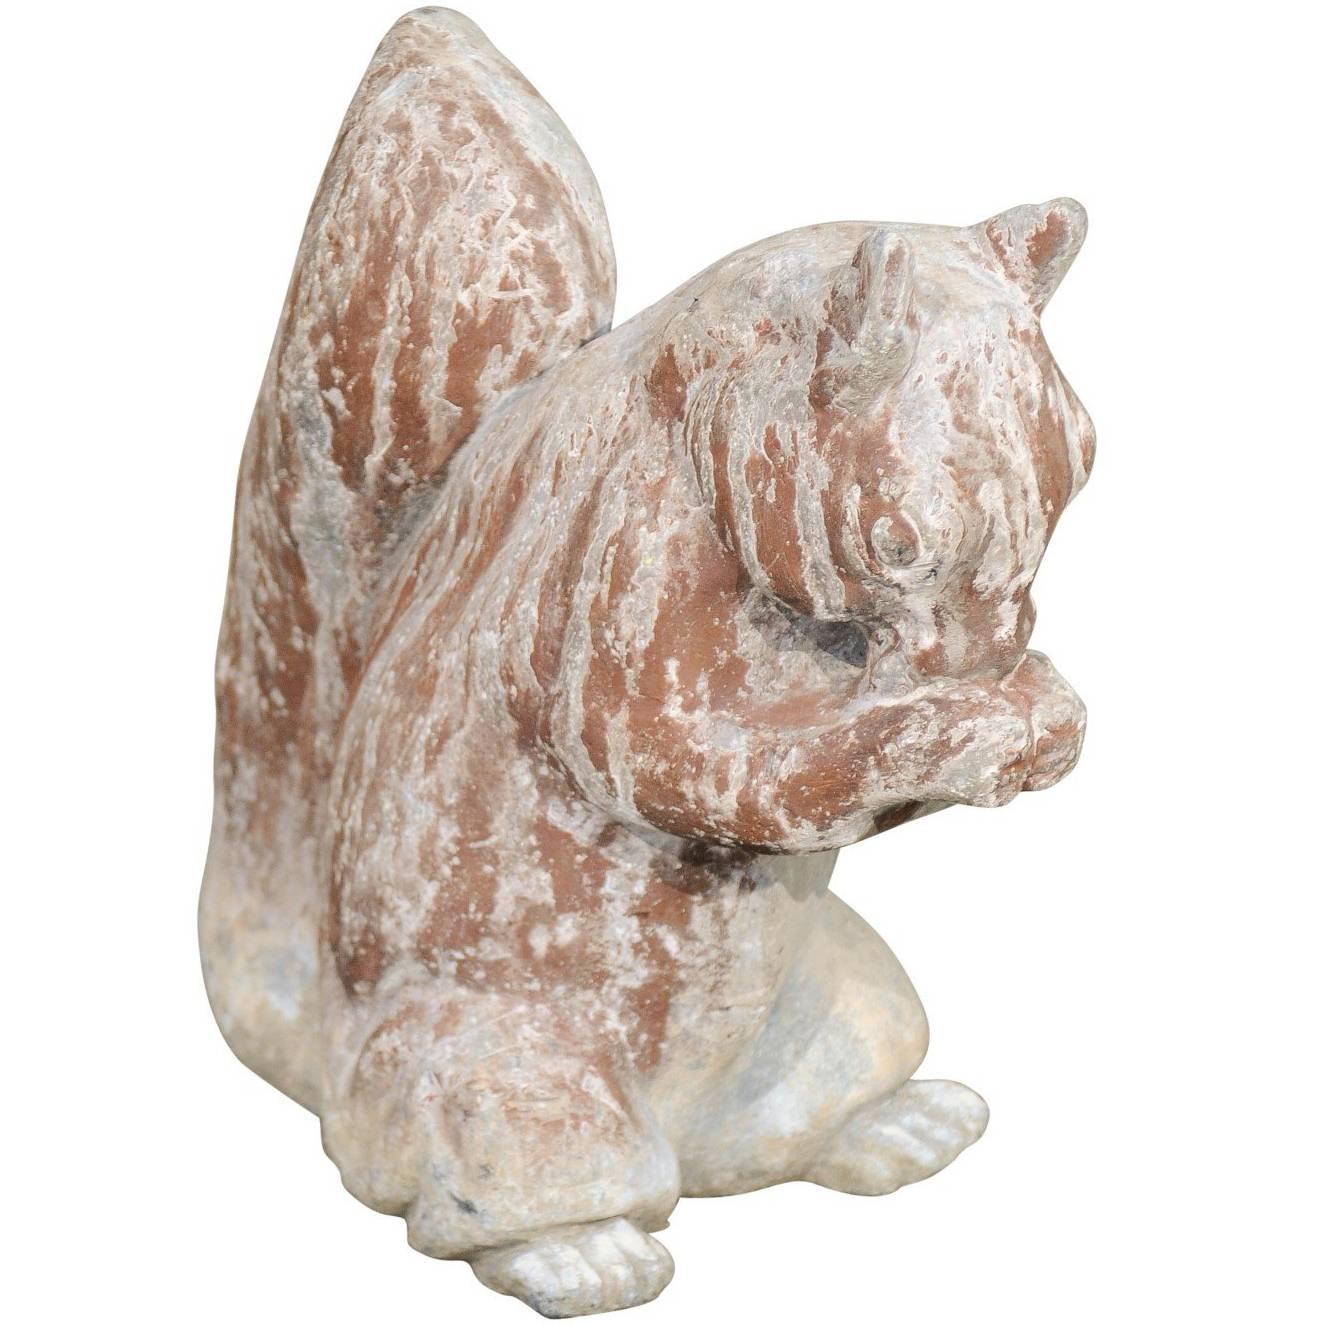 English 1930s Painted Lead Animal Sculpture Depicting a Squirrel Eating a Nut For Sale